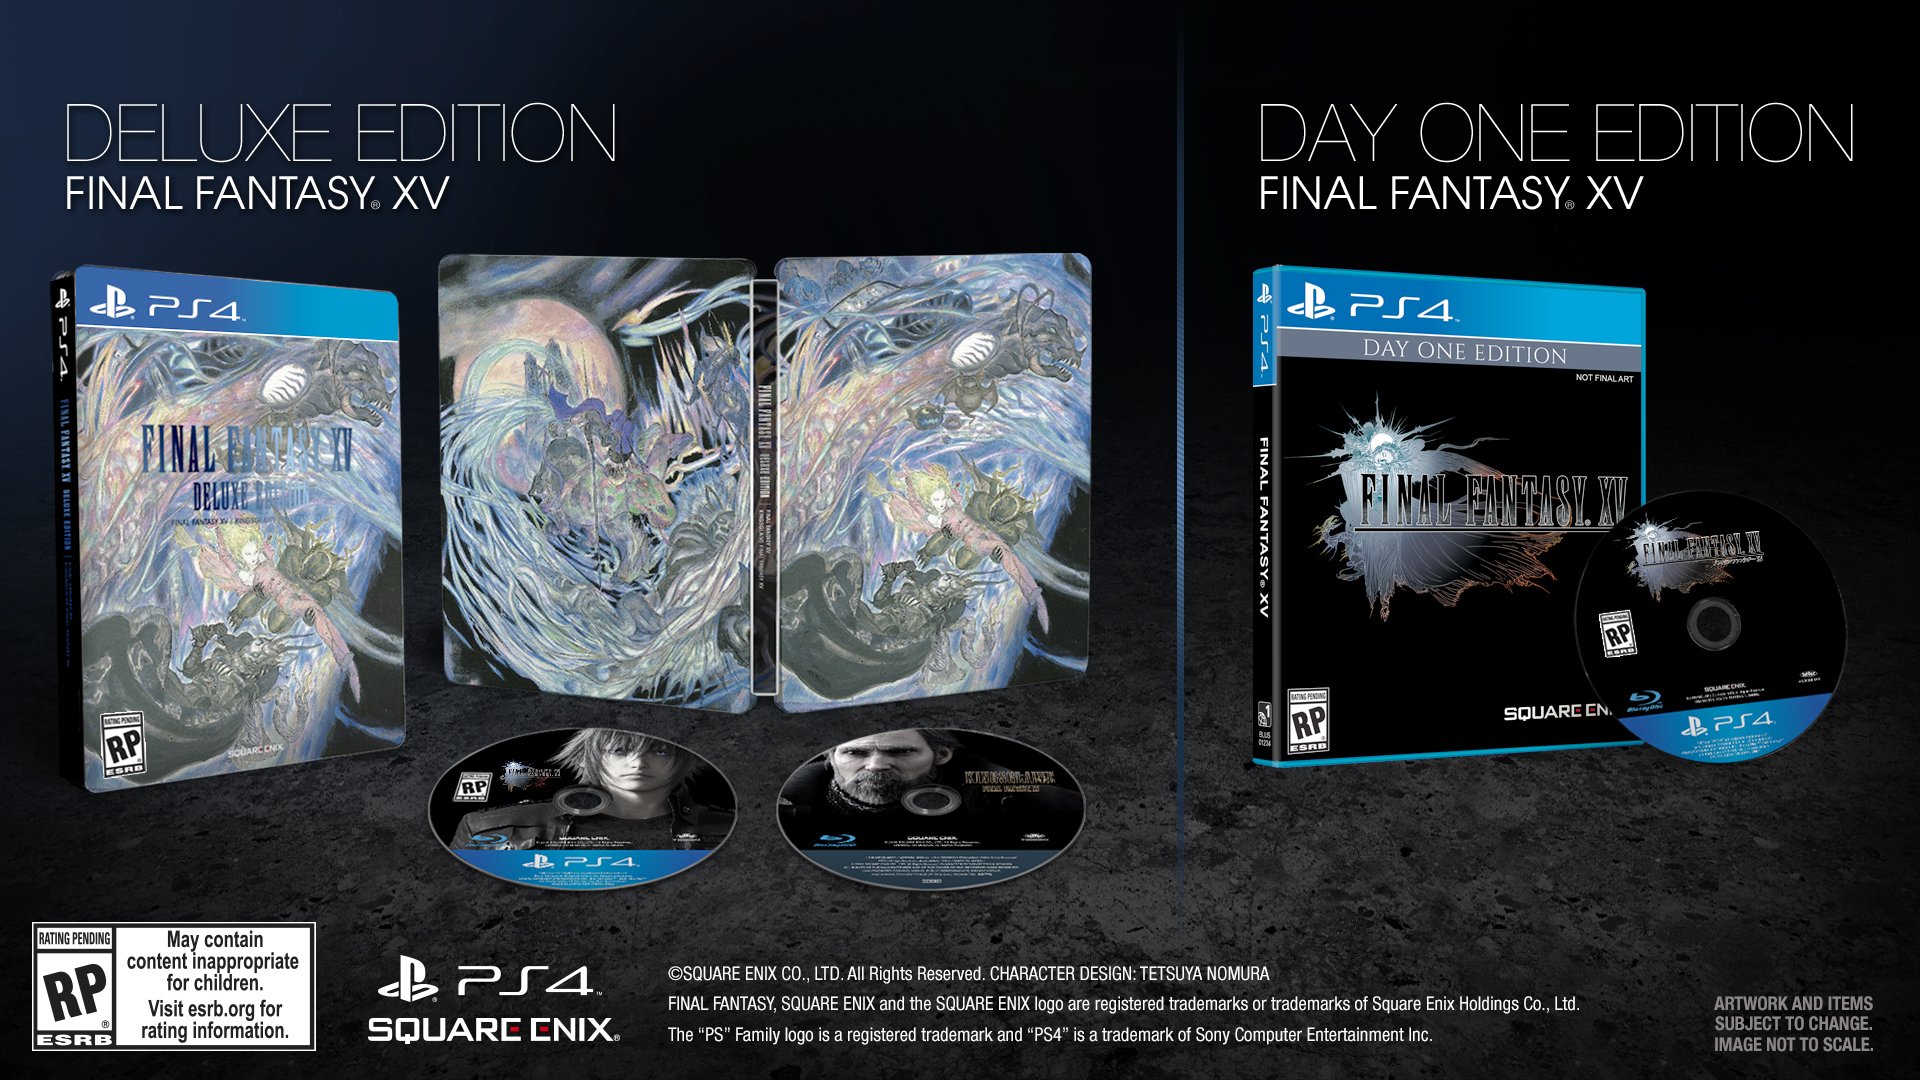 Final Fantasy XV Deluxe Edition - Day One Copy